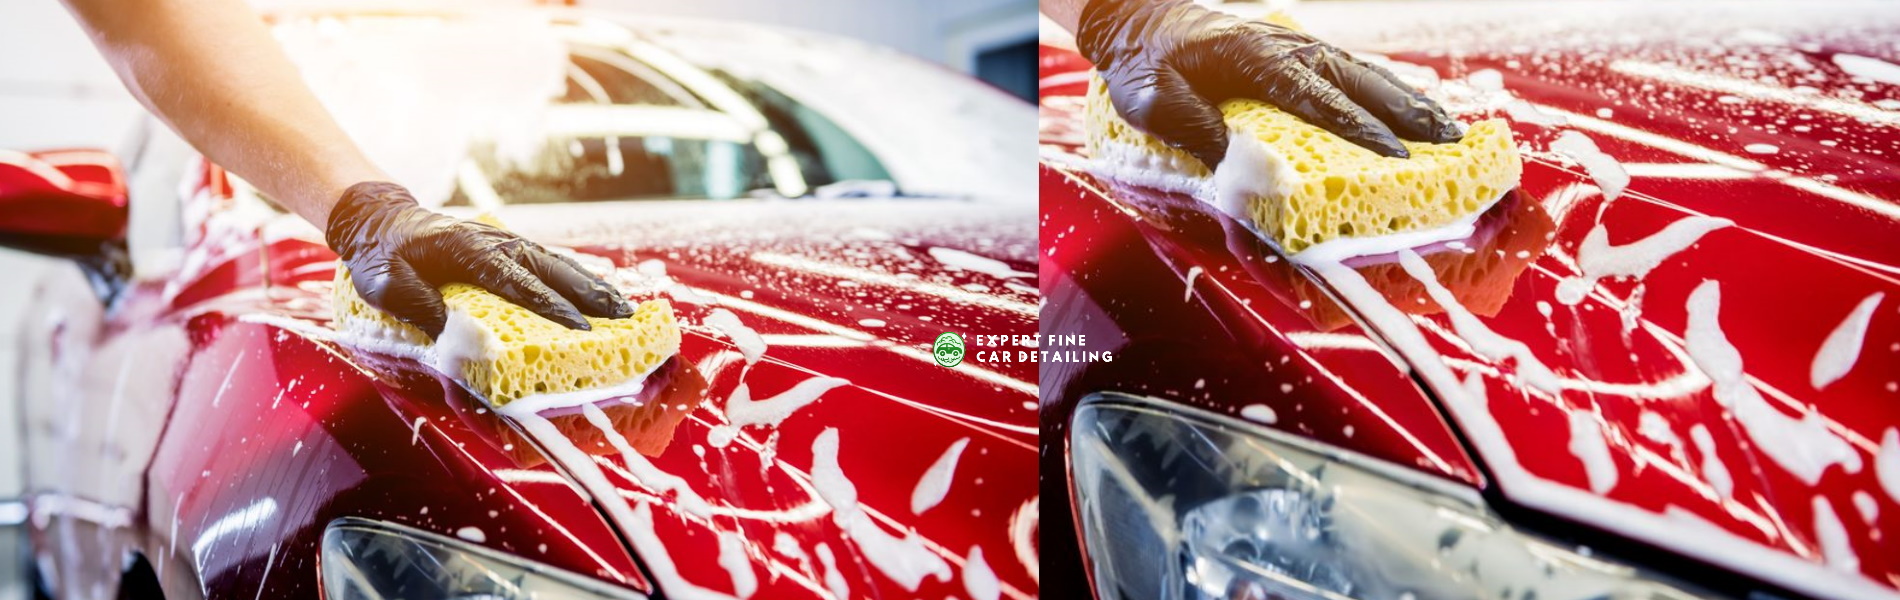 We are a premier car detailing company dedicated to providing exceptional services that elevate the appearance and condition of your vehicle. With our meticulous attention to detail, cutting-edge techniques, and high-quality products, we guarantee a profe